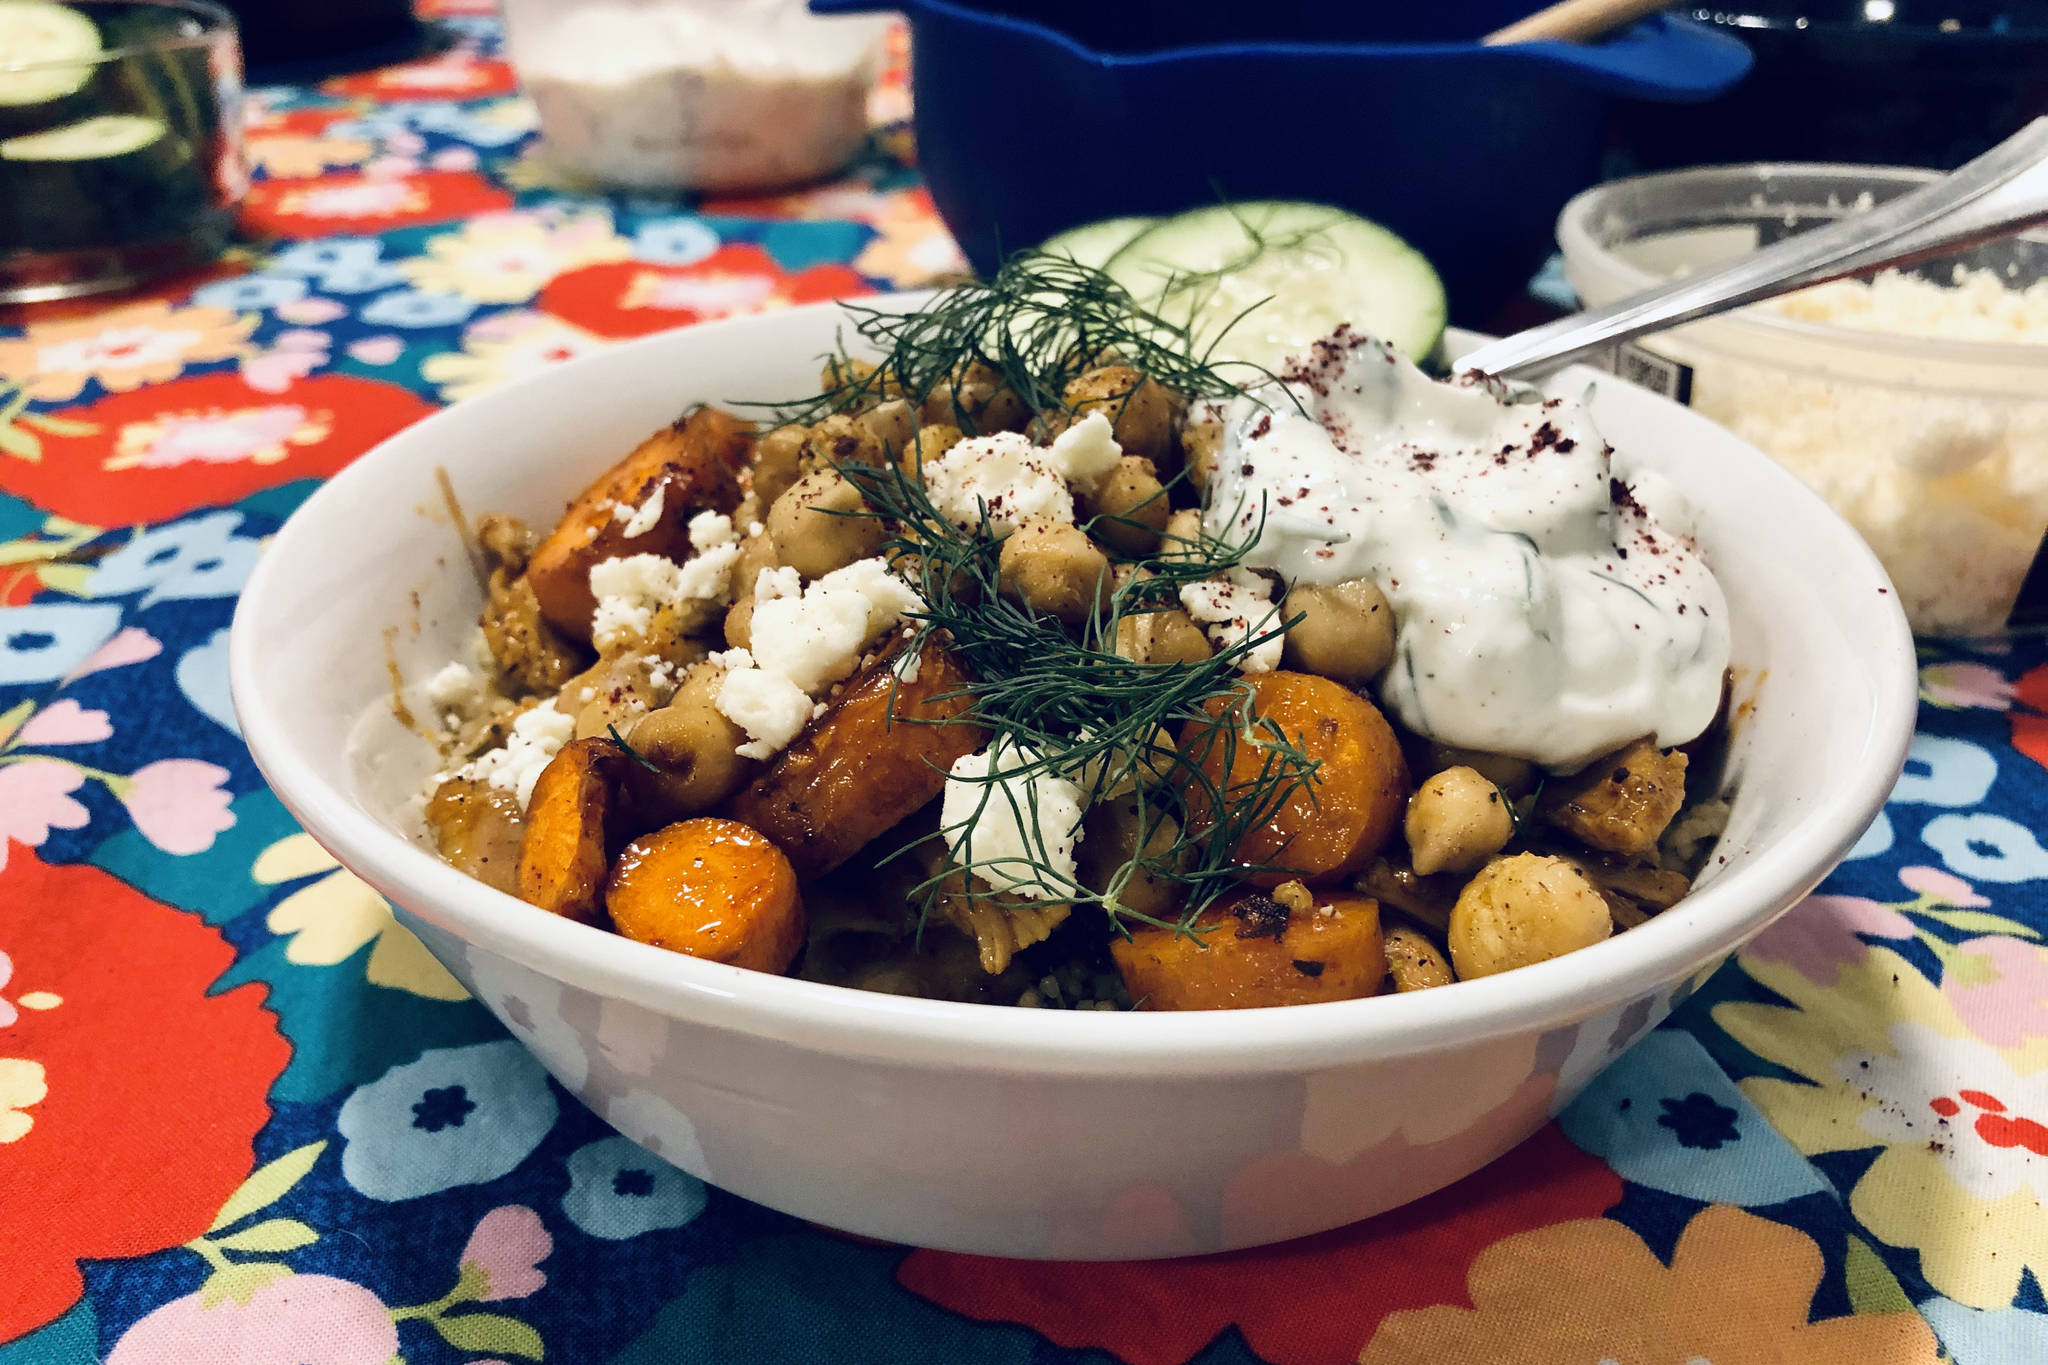 A Greek and Moroccan-inspired grain bowl made with elements of my favorite foods and flavors, photographed on Feb. 3, 2021, in Anchorage, Alaska. (Photo by Victoria Petersen/Peninsula Clarion)